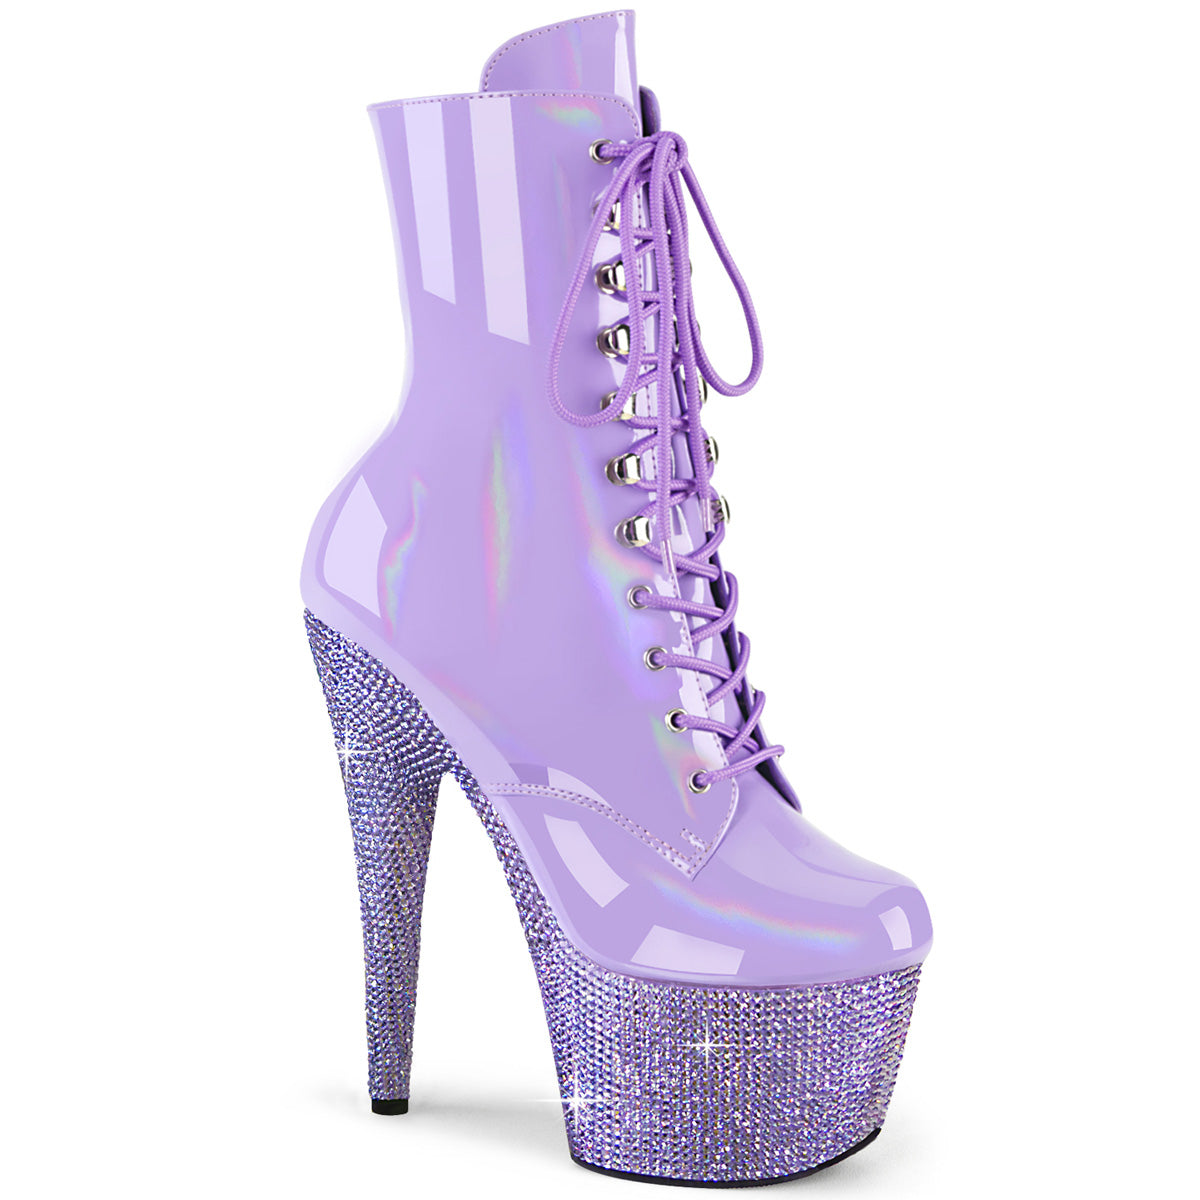 PLEASER BEJEWELED 1020-7 LAVENDER RHINESTONE 7 INCH HIGH HEEL ANKLE BOOTS SIZE 8 USA SALE